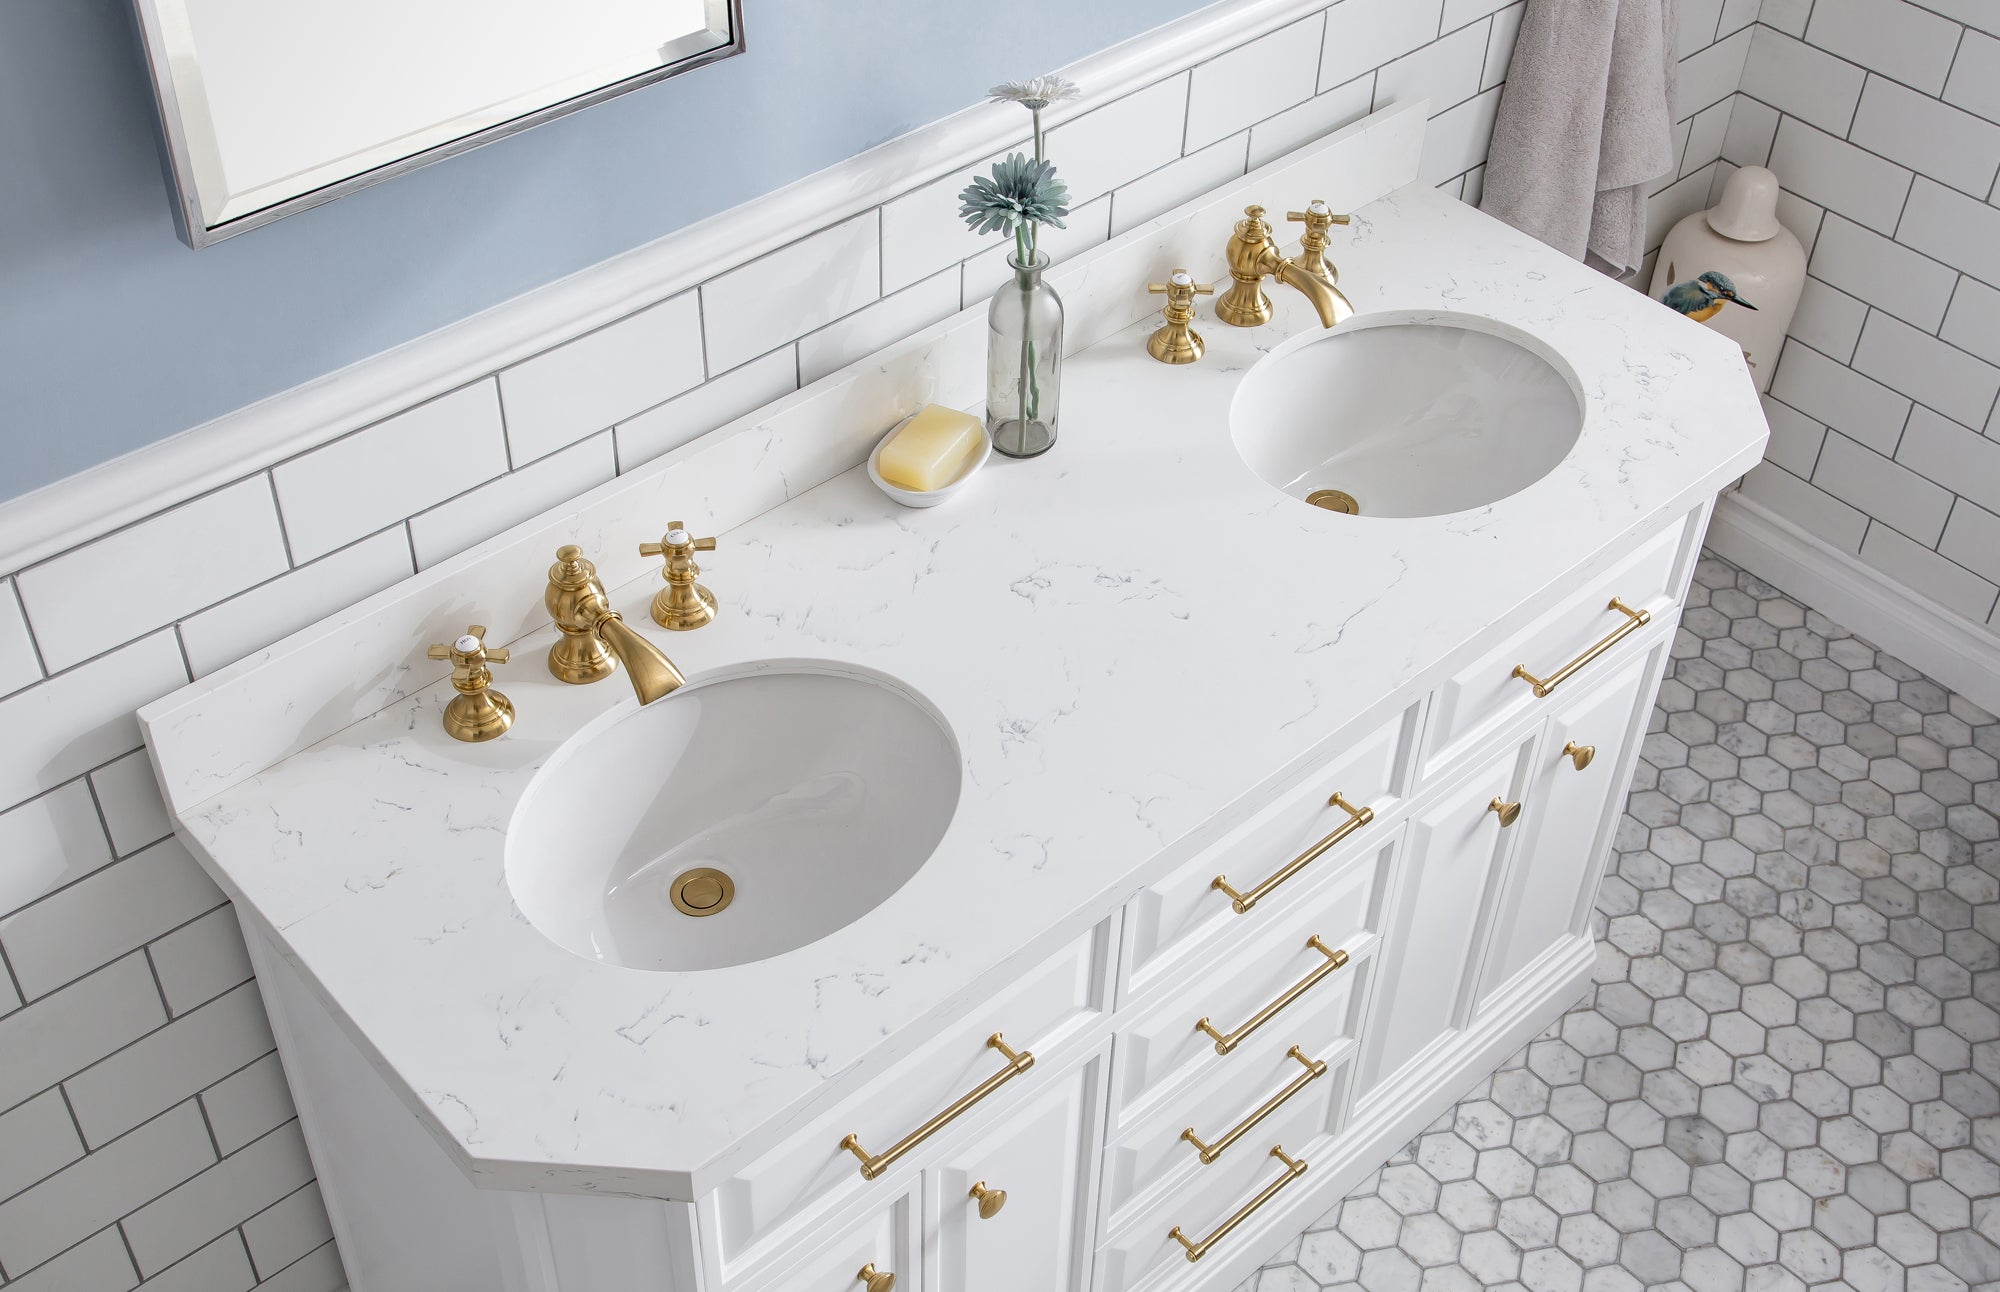 Water Creation | 60" Palace Collection Quartz Carrara Pure White Bathroom Vanity Set With Hardware And F2-0013 Faucets in Satin Gold Finish And Only Mirrors in Chrome Finish | PA60QZ06PW-000FX1306